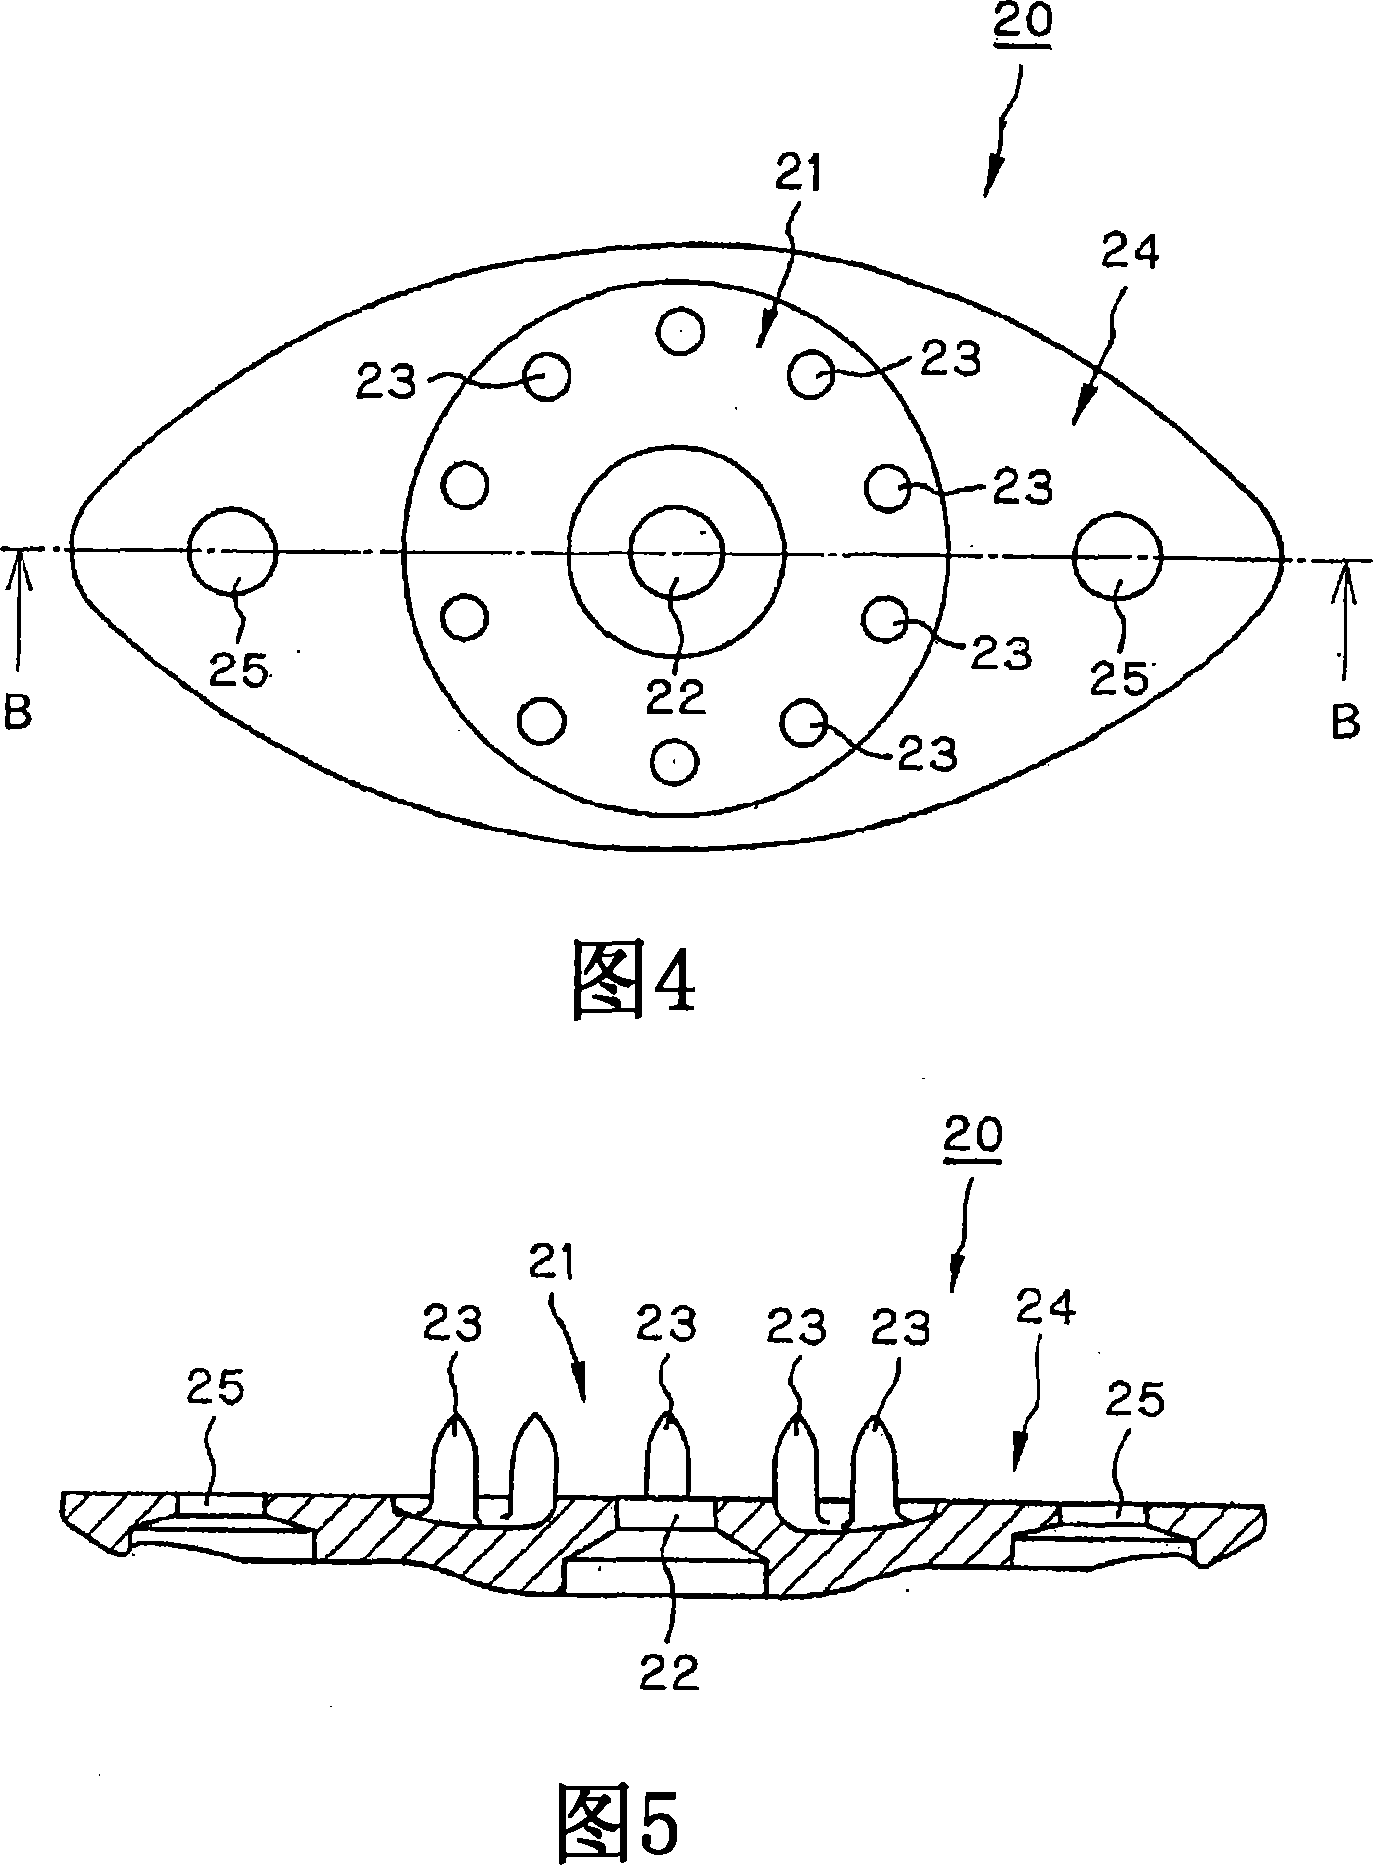 Tongue plate stopper and safety belt device using the same